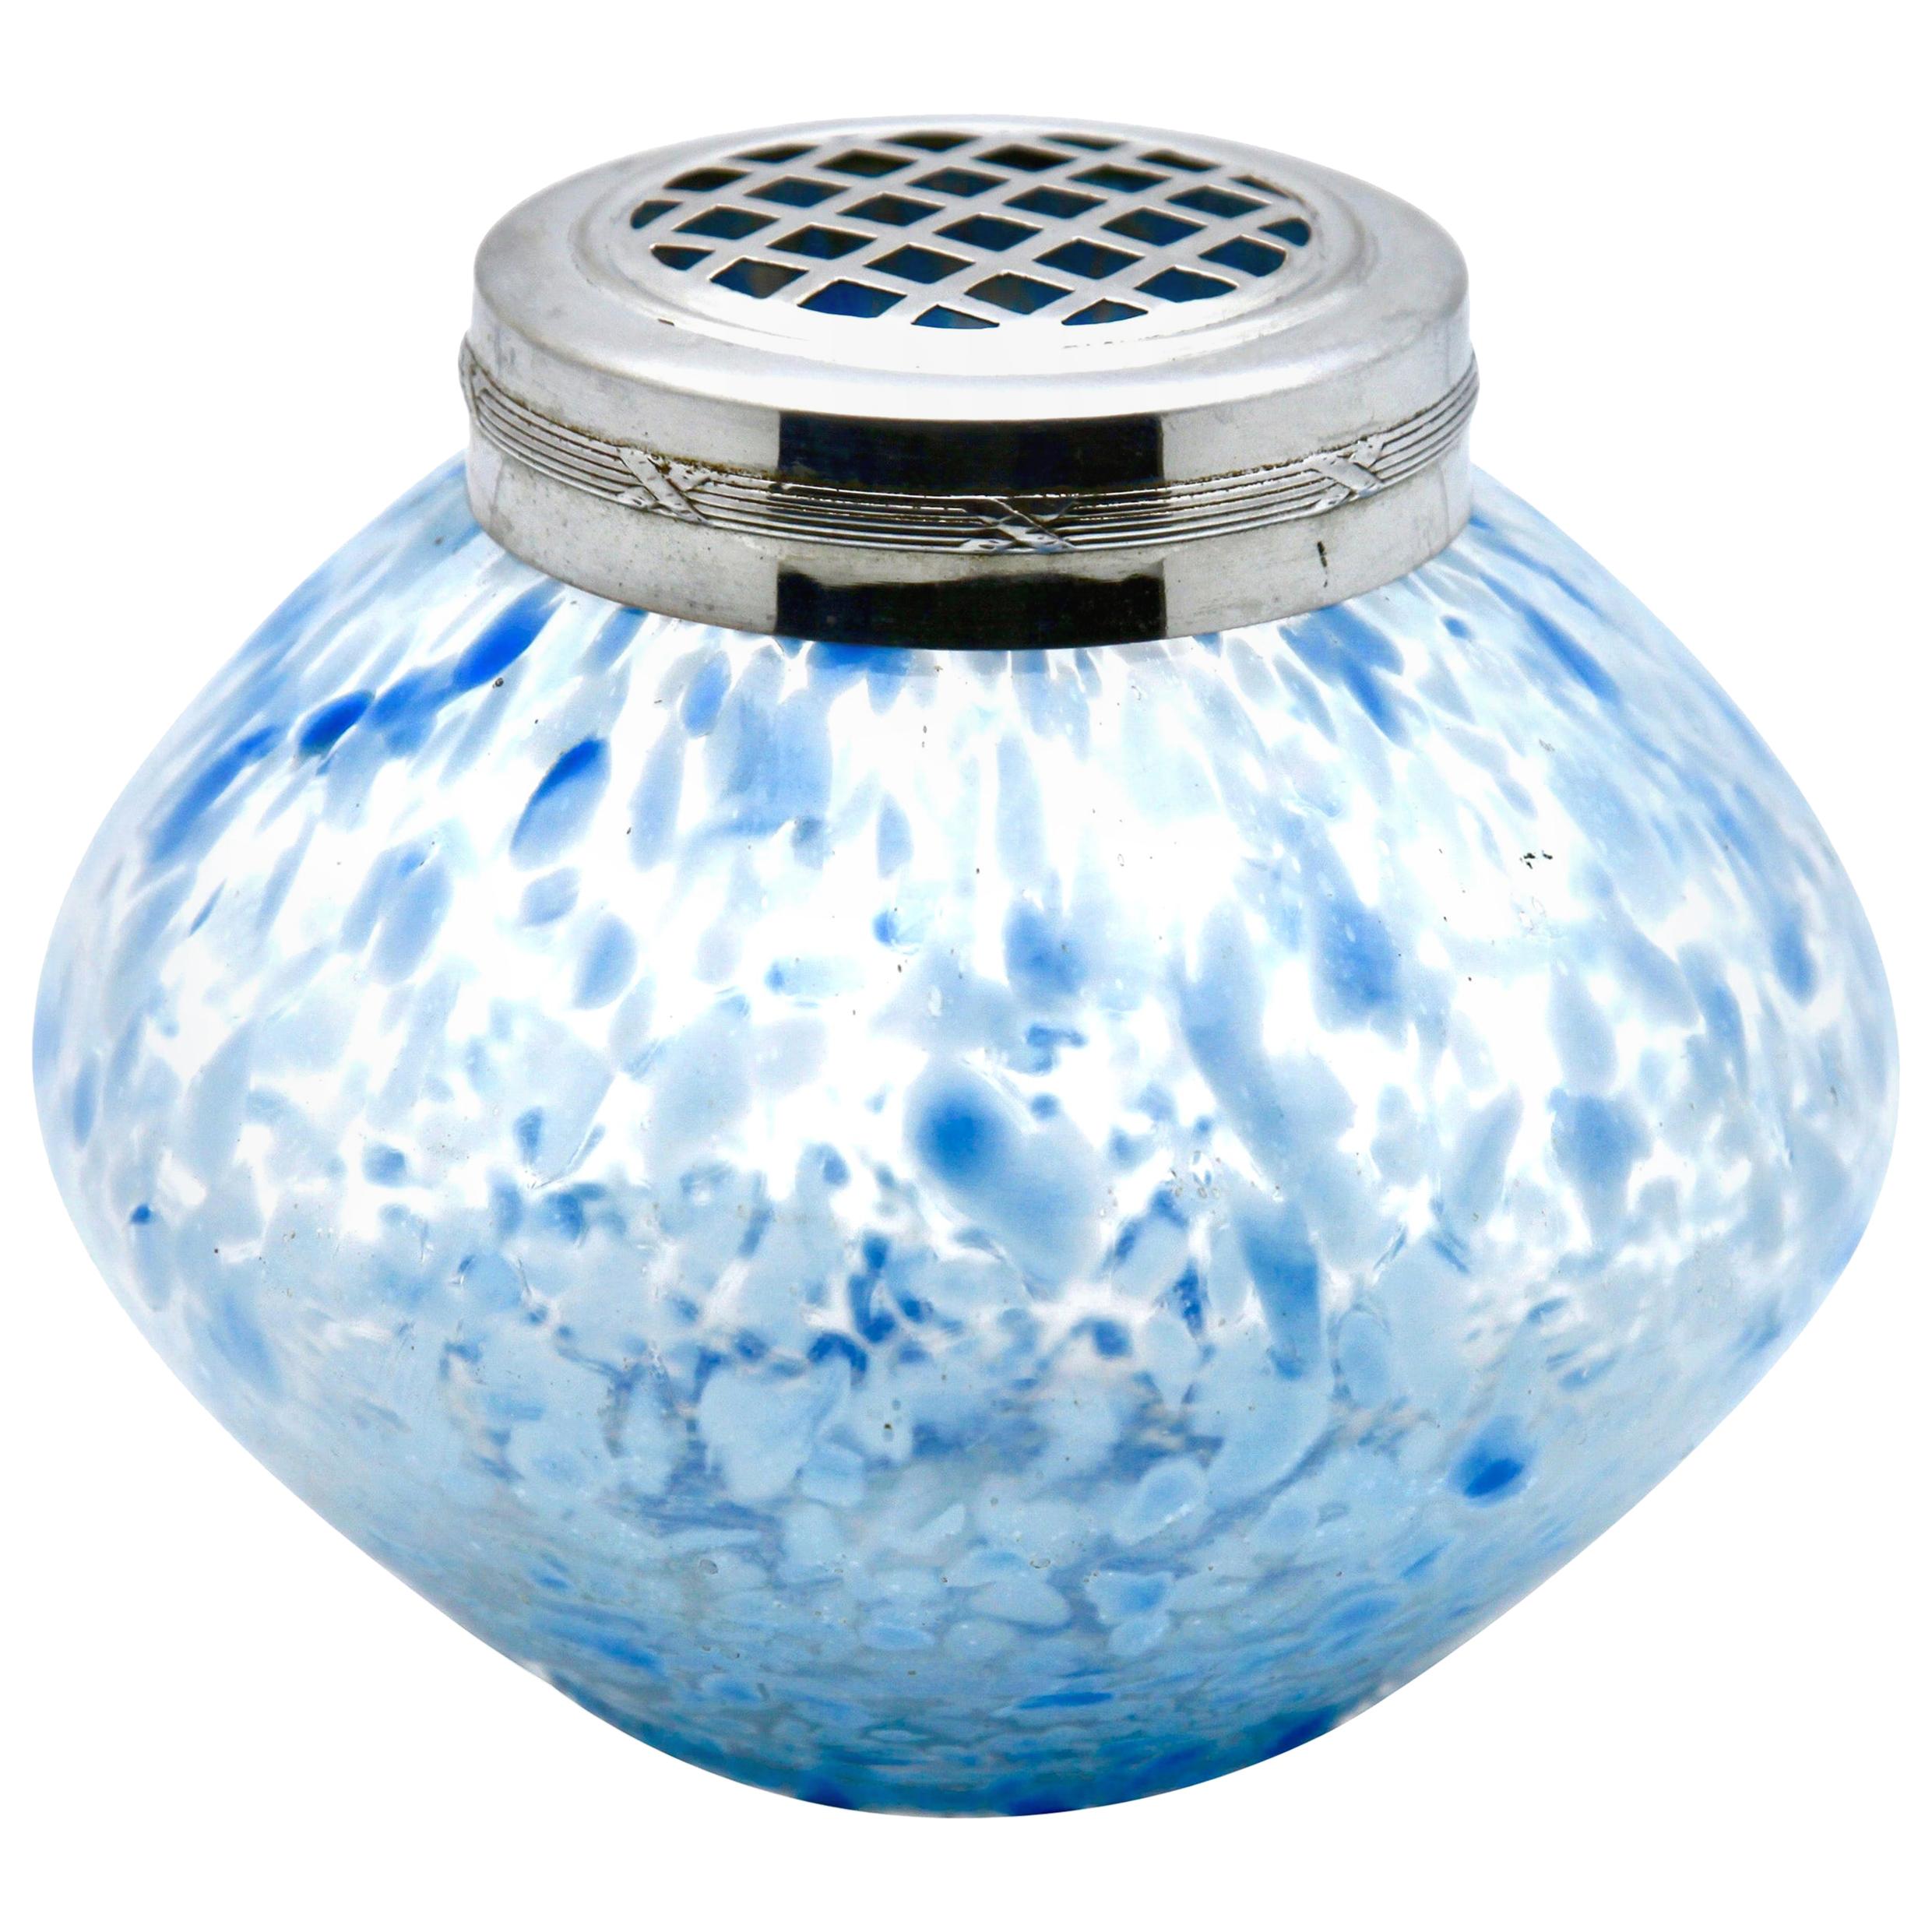 Bohemian 'Pique Fleurs' Vase with Grille, Flecked with Blue, Late 1930s